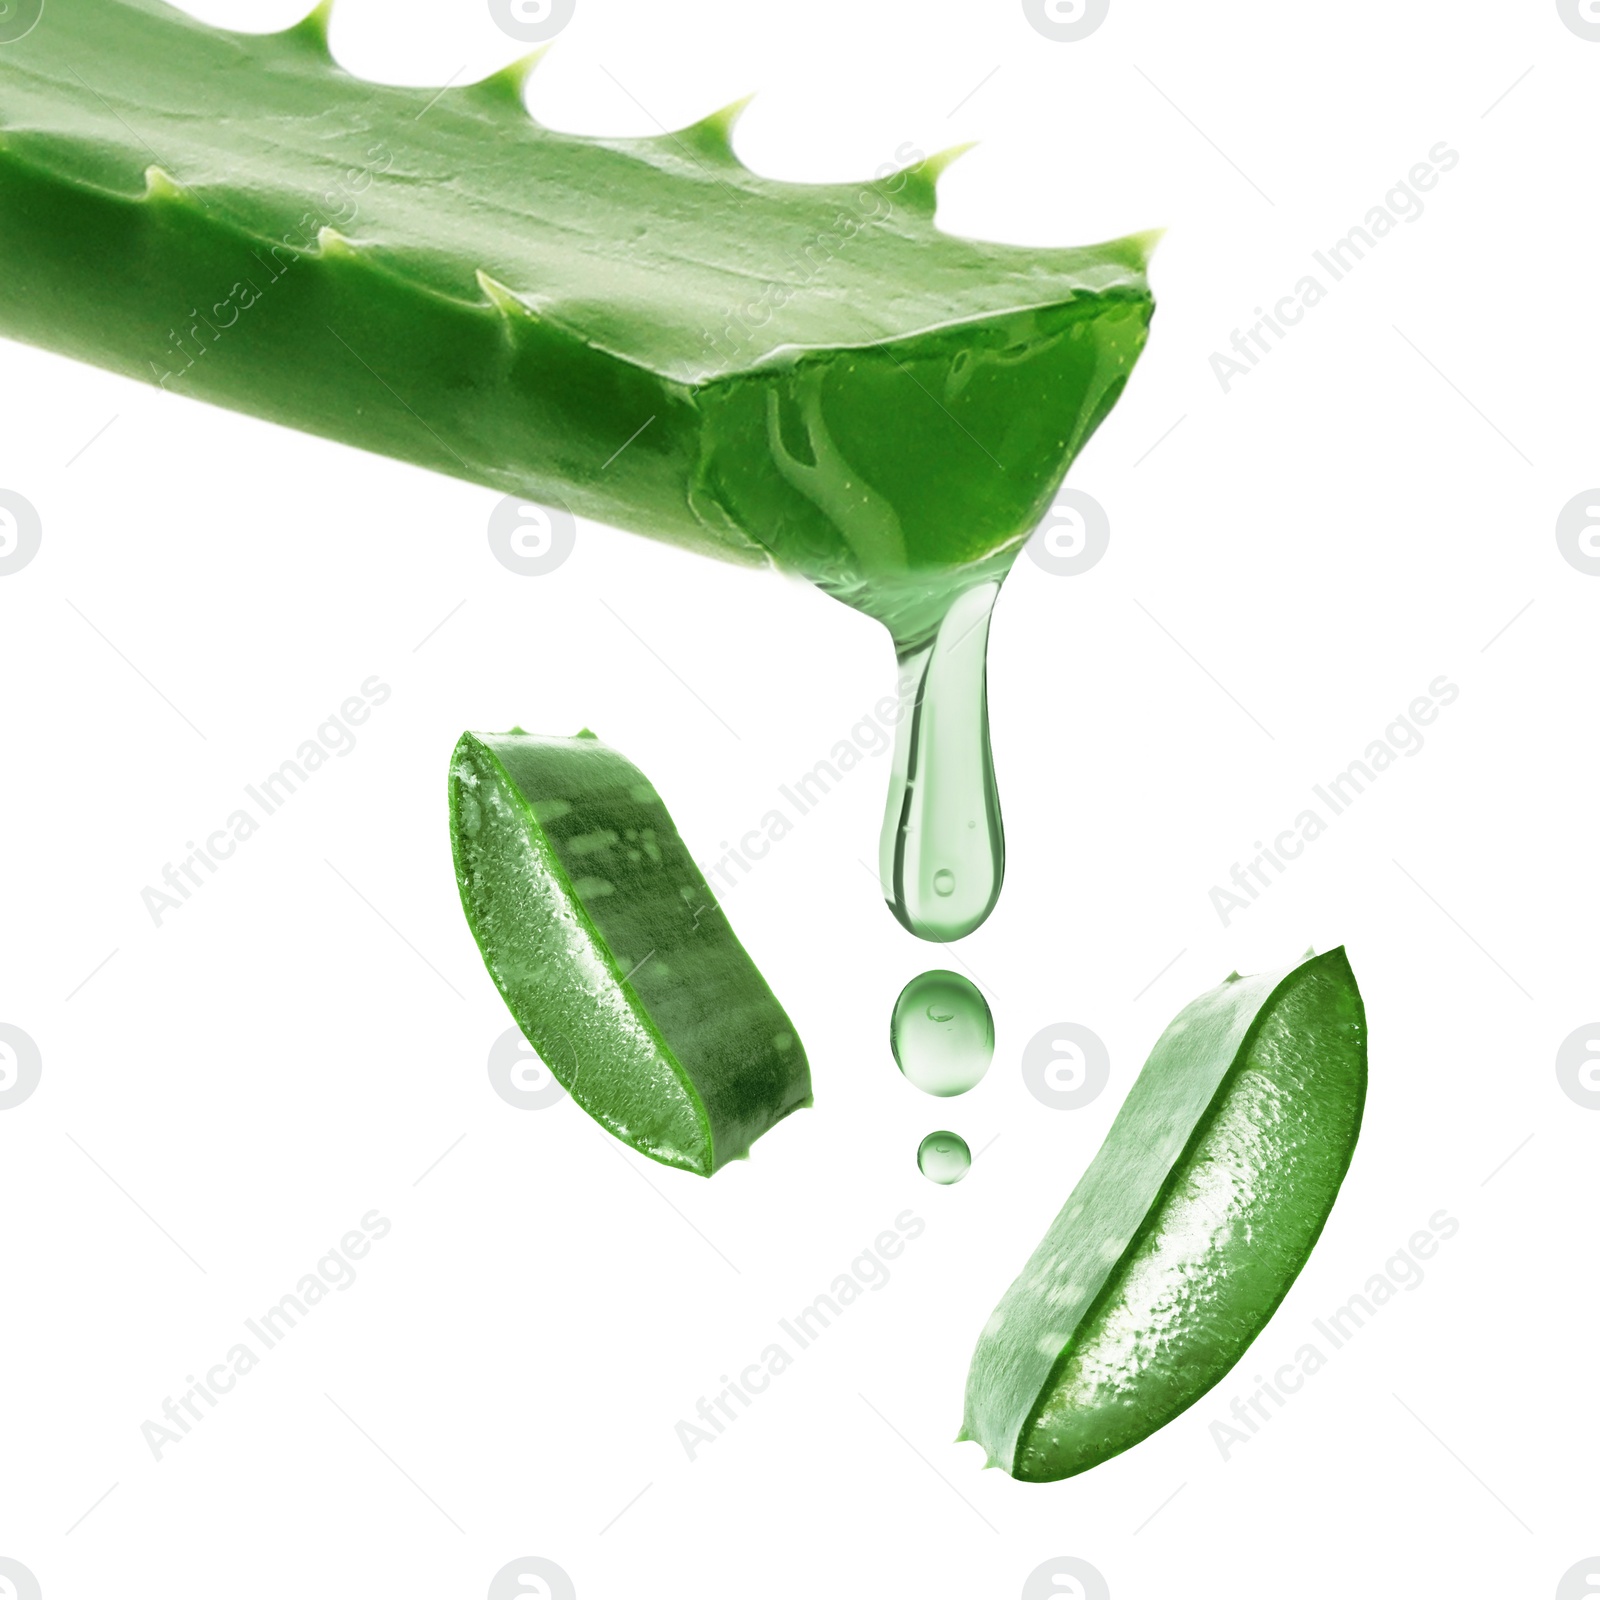 Image of Aloe vera gel flowing down from green leaf on white background